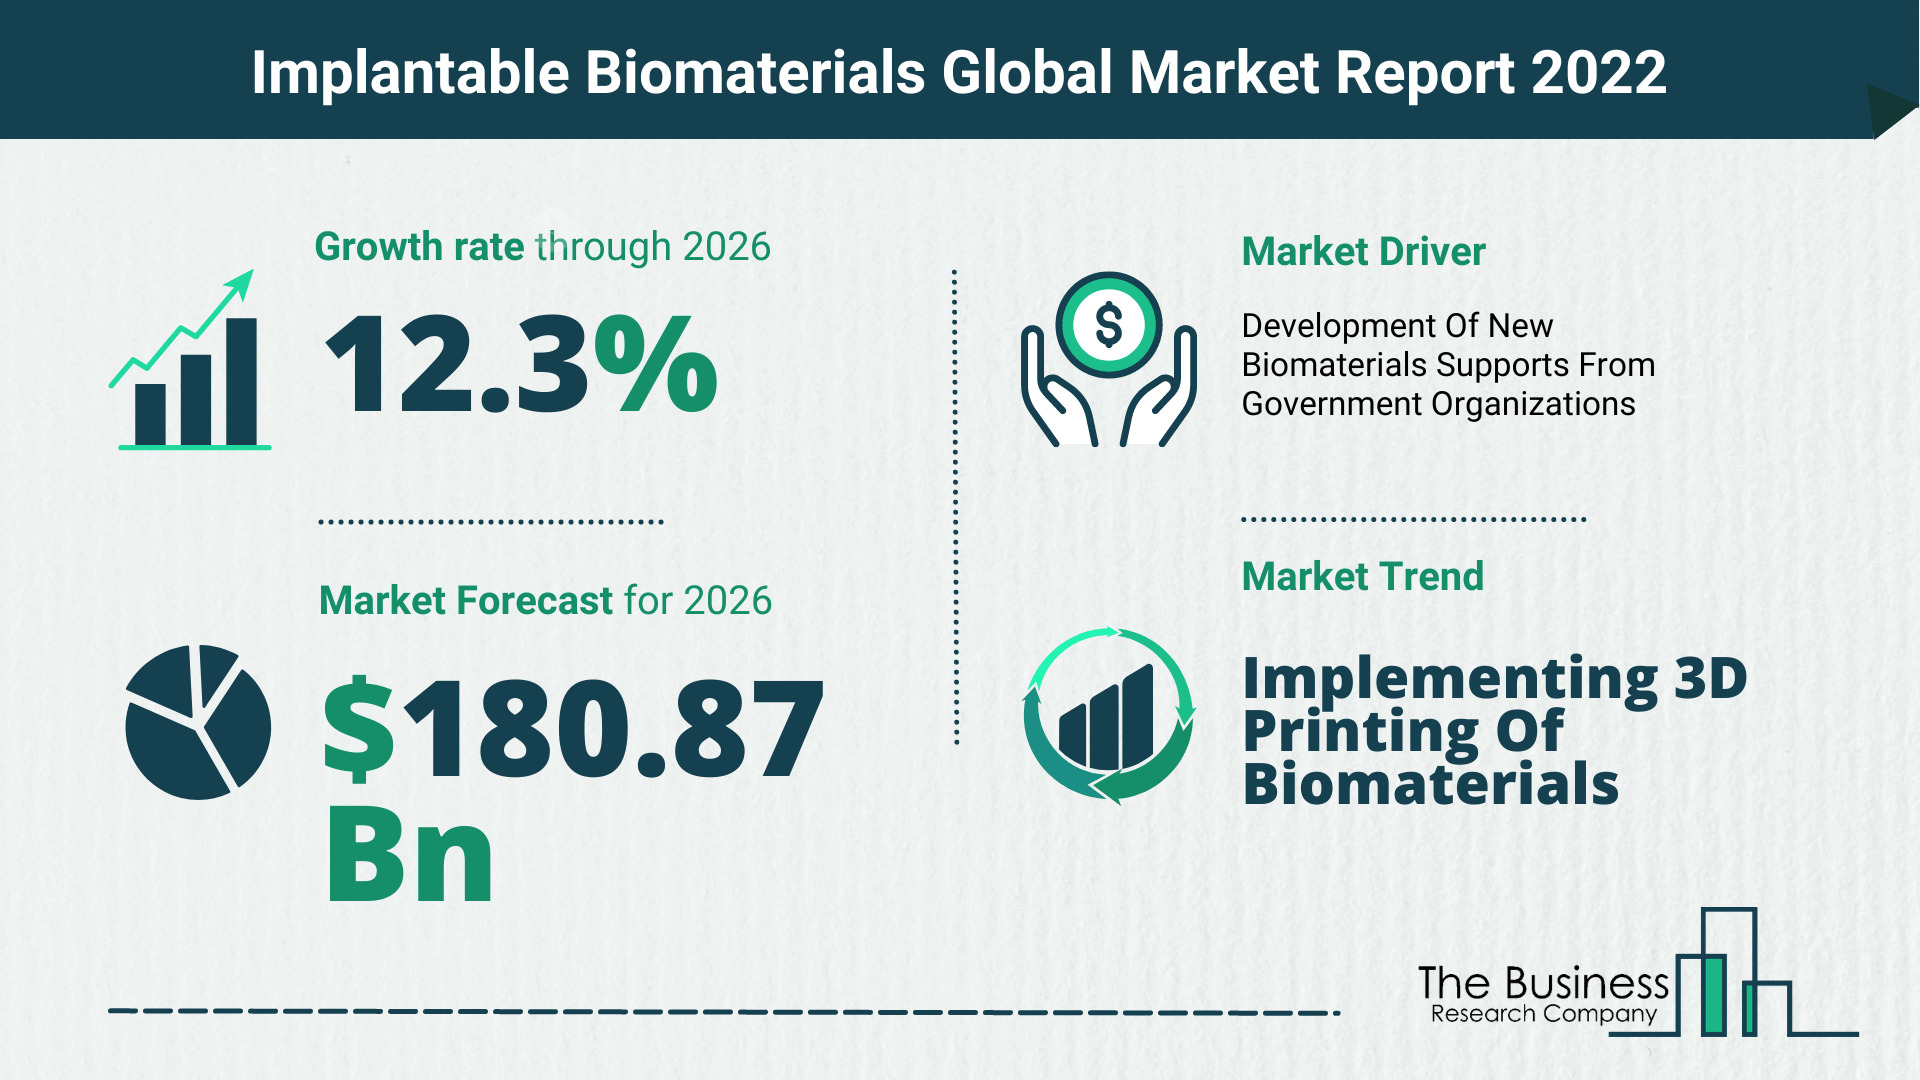 The Implantable Biomaterials Market Share, Market Size, And Growth Rate 2022